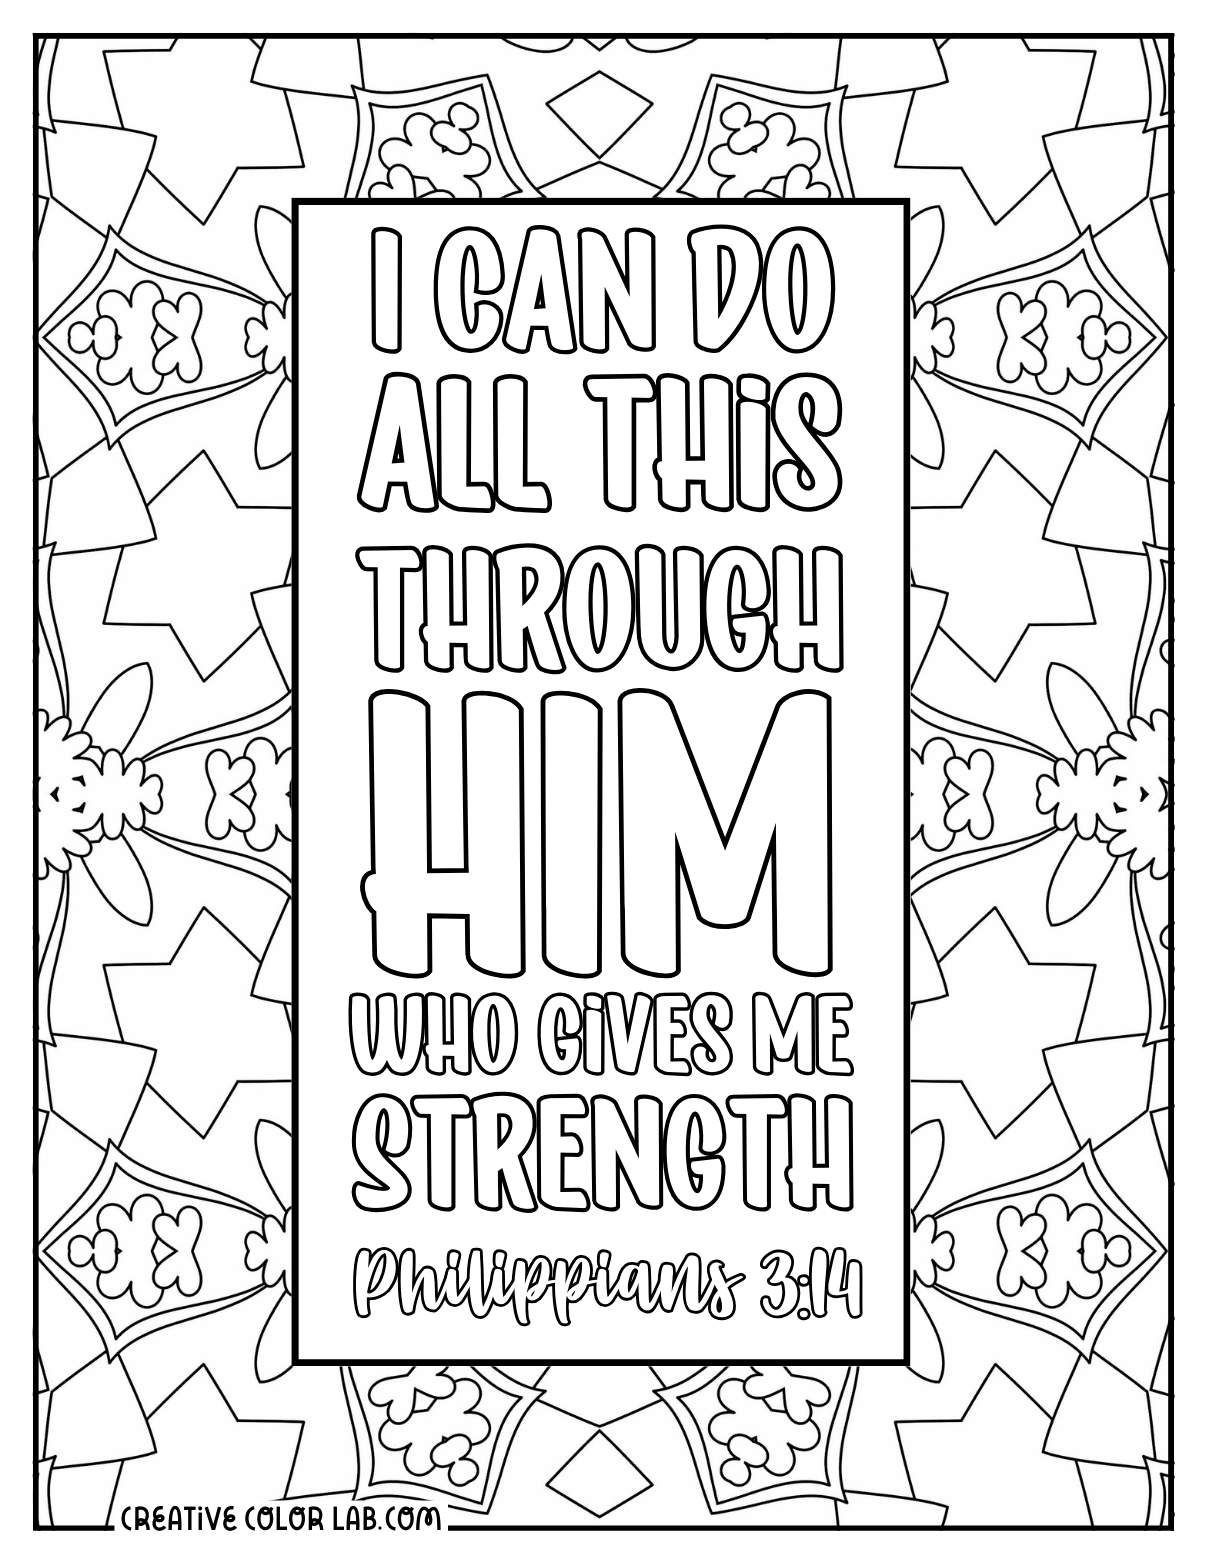 Philippians bible verse free coloring page for adults.